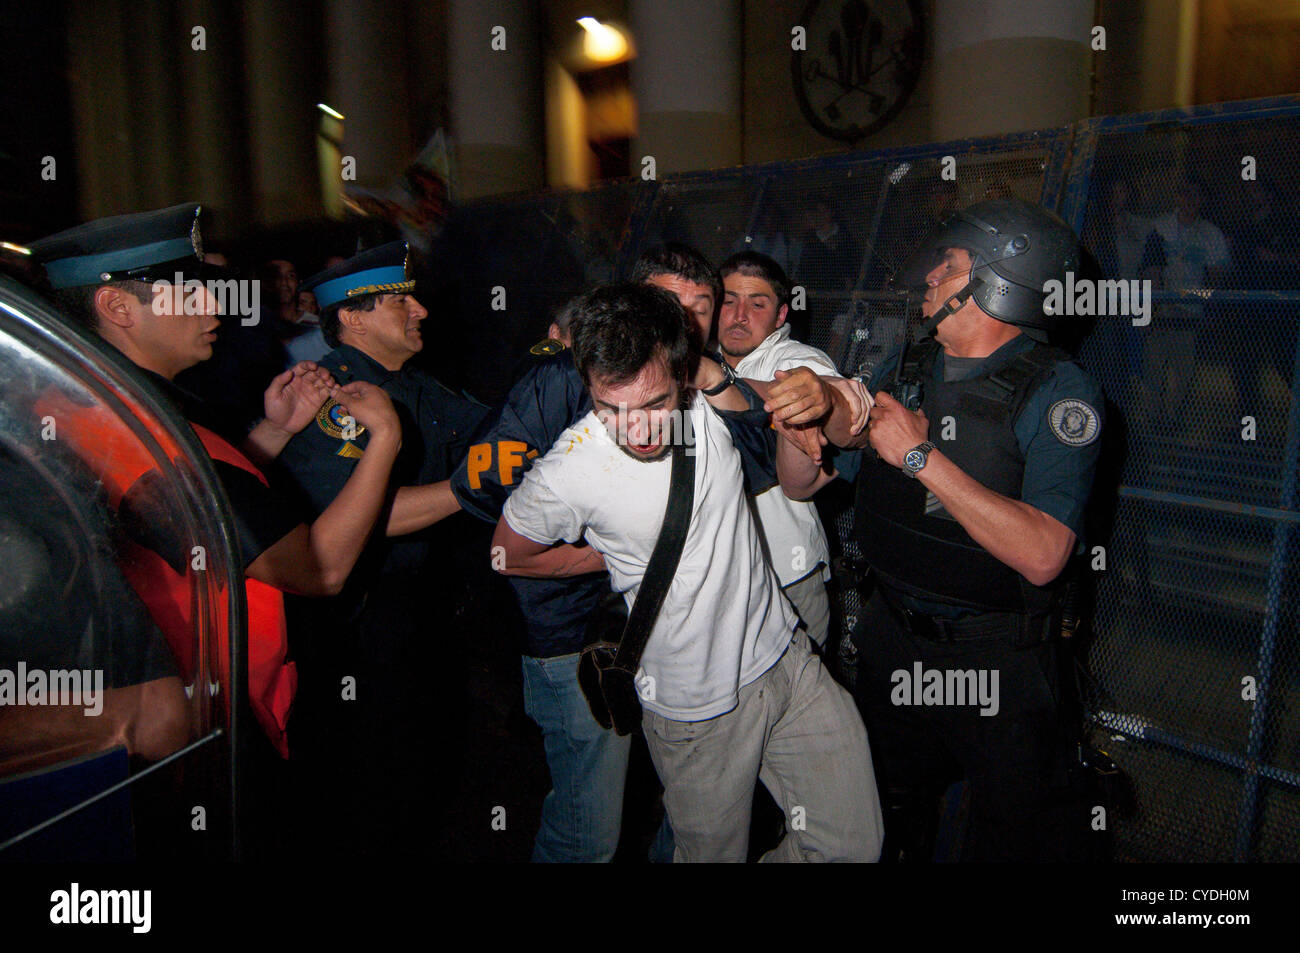 Nov. 1, 2012 - Buenos Aires, Argentina - An anti-abortion demonstrator attacks a pro-abortion activist as he is arrested by the Police. Groups of pro-abortion demonstrators clashed with the police after several thousands rallied from Congress to the Cathedral in Buenos Aires. At the Cathedral, guarded by Catholic anti-abortion activists, a Police operation was set up to prevent clashes among the two opposite groups. Pro Abortion demonstrators demand the immediate discussion in Congress of the law that would allow legal, free and safe abortions in public hospitals, to which Catholics oppose. Il Stock Photo